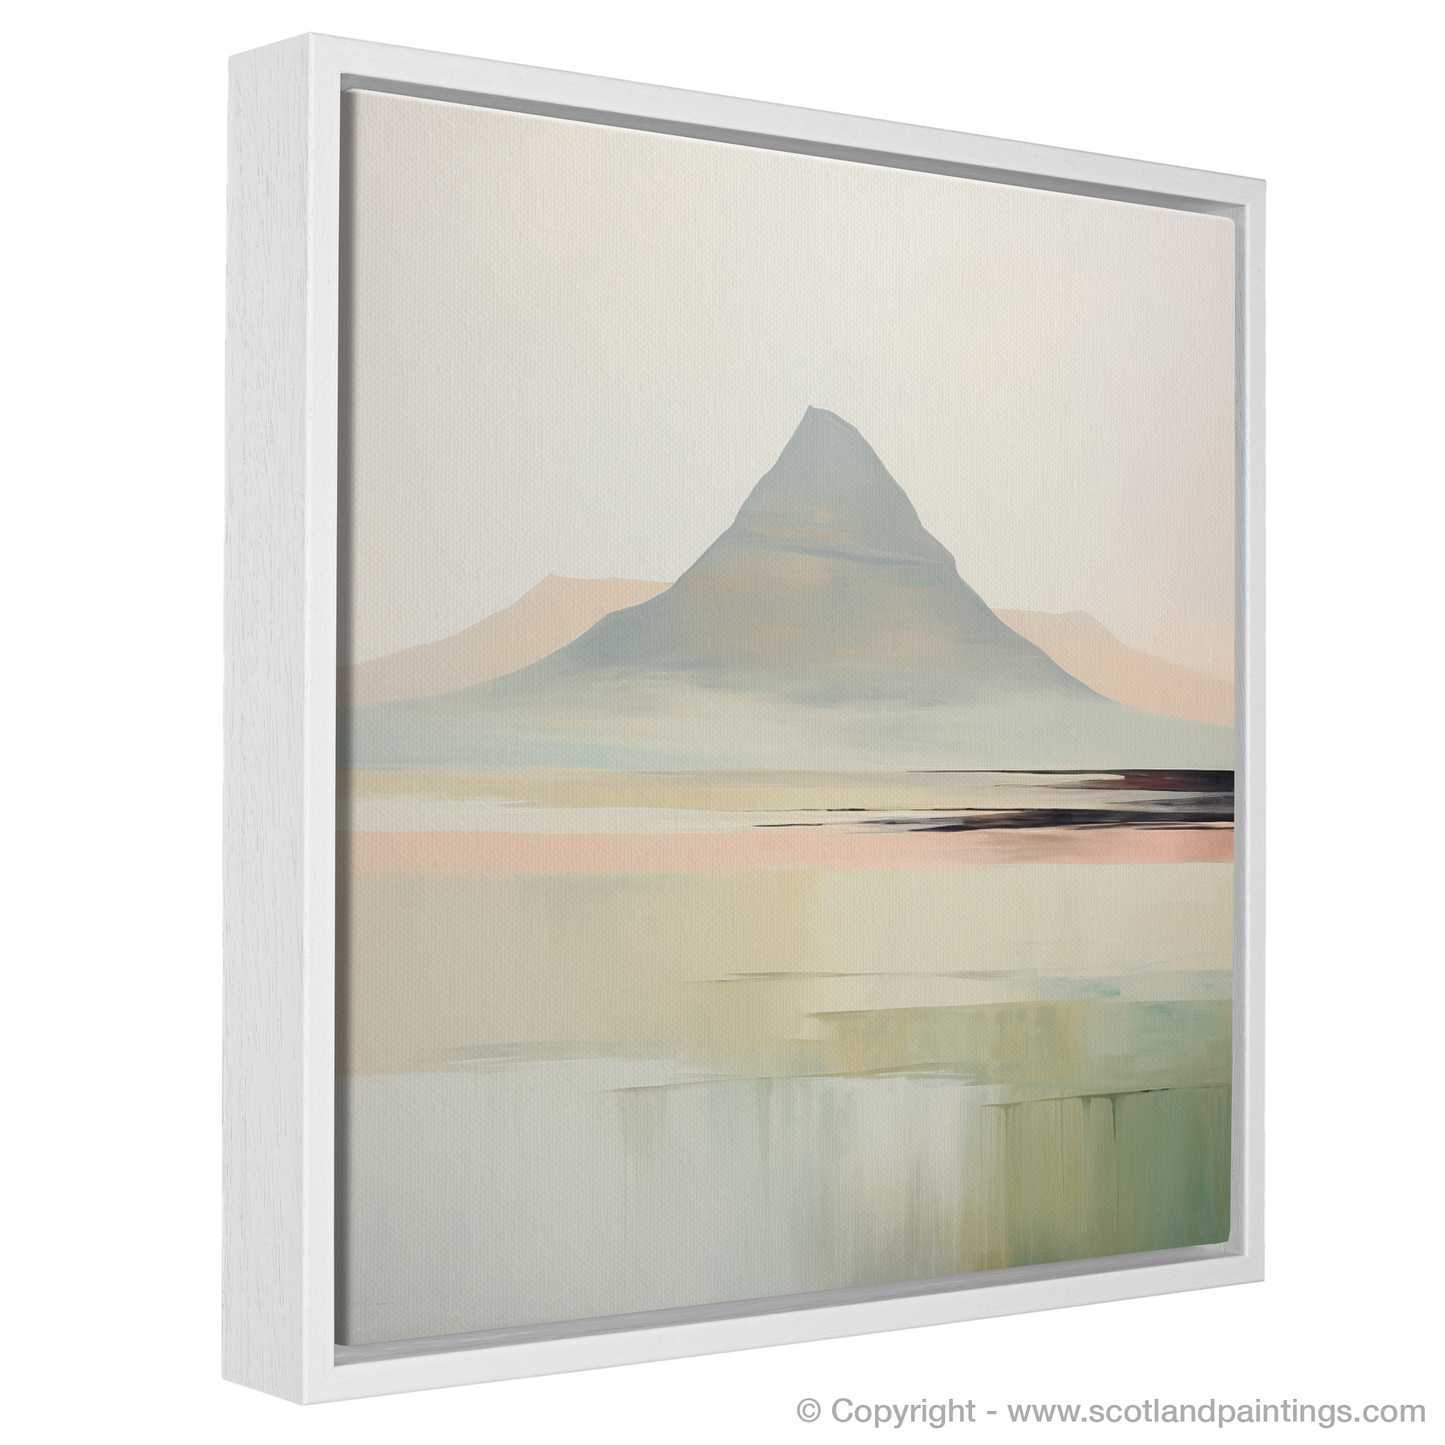 Painting and Art Print of Càrn an t-Sagairt Mòr entitled "Abstract Highland Serenity: An Ode to Càrn an t-Sagairt Mòr".